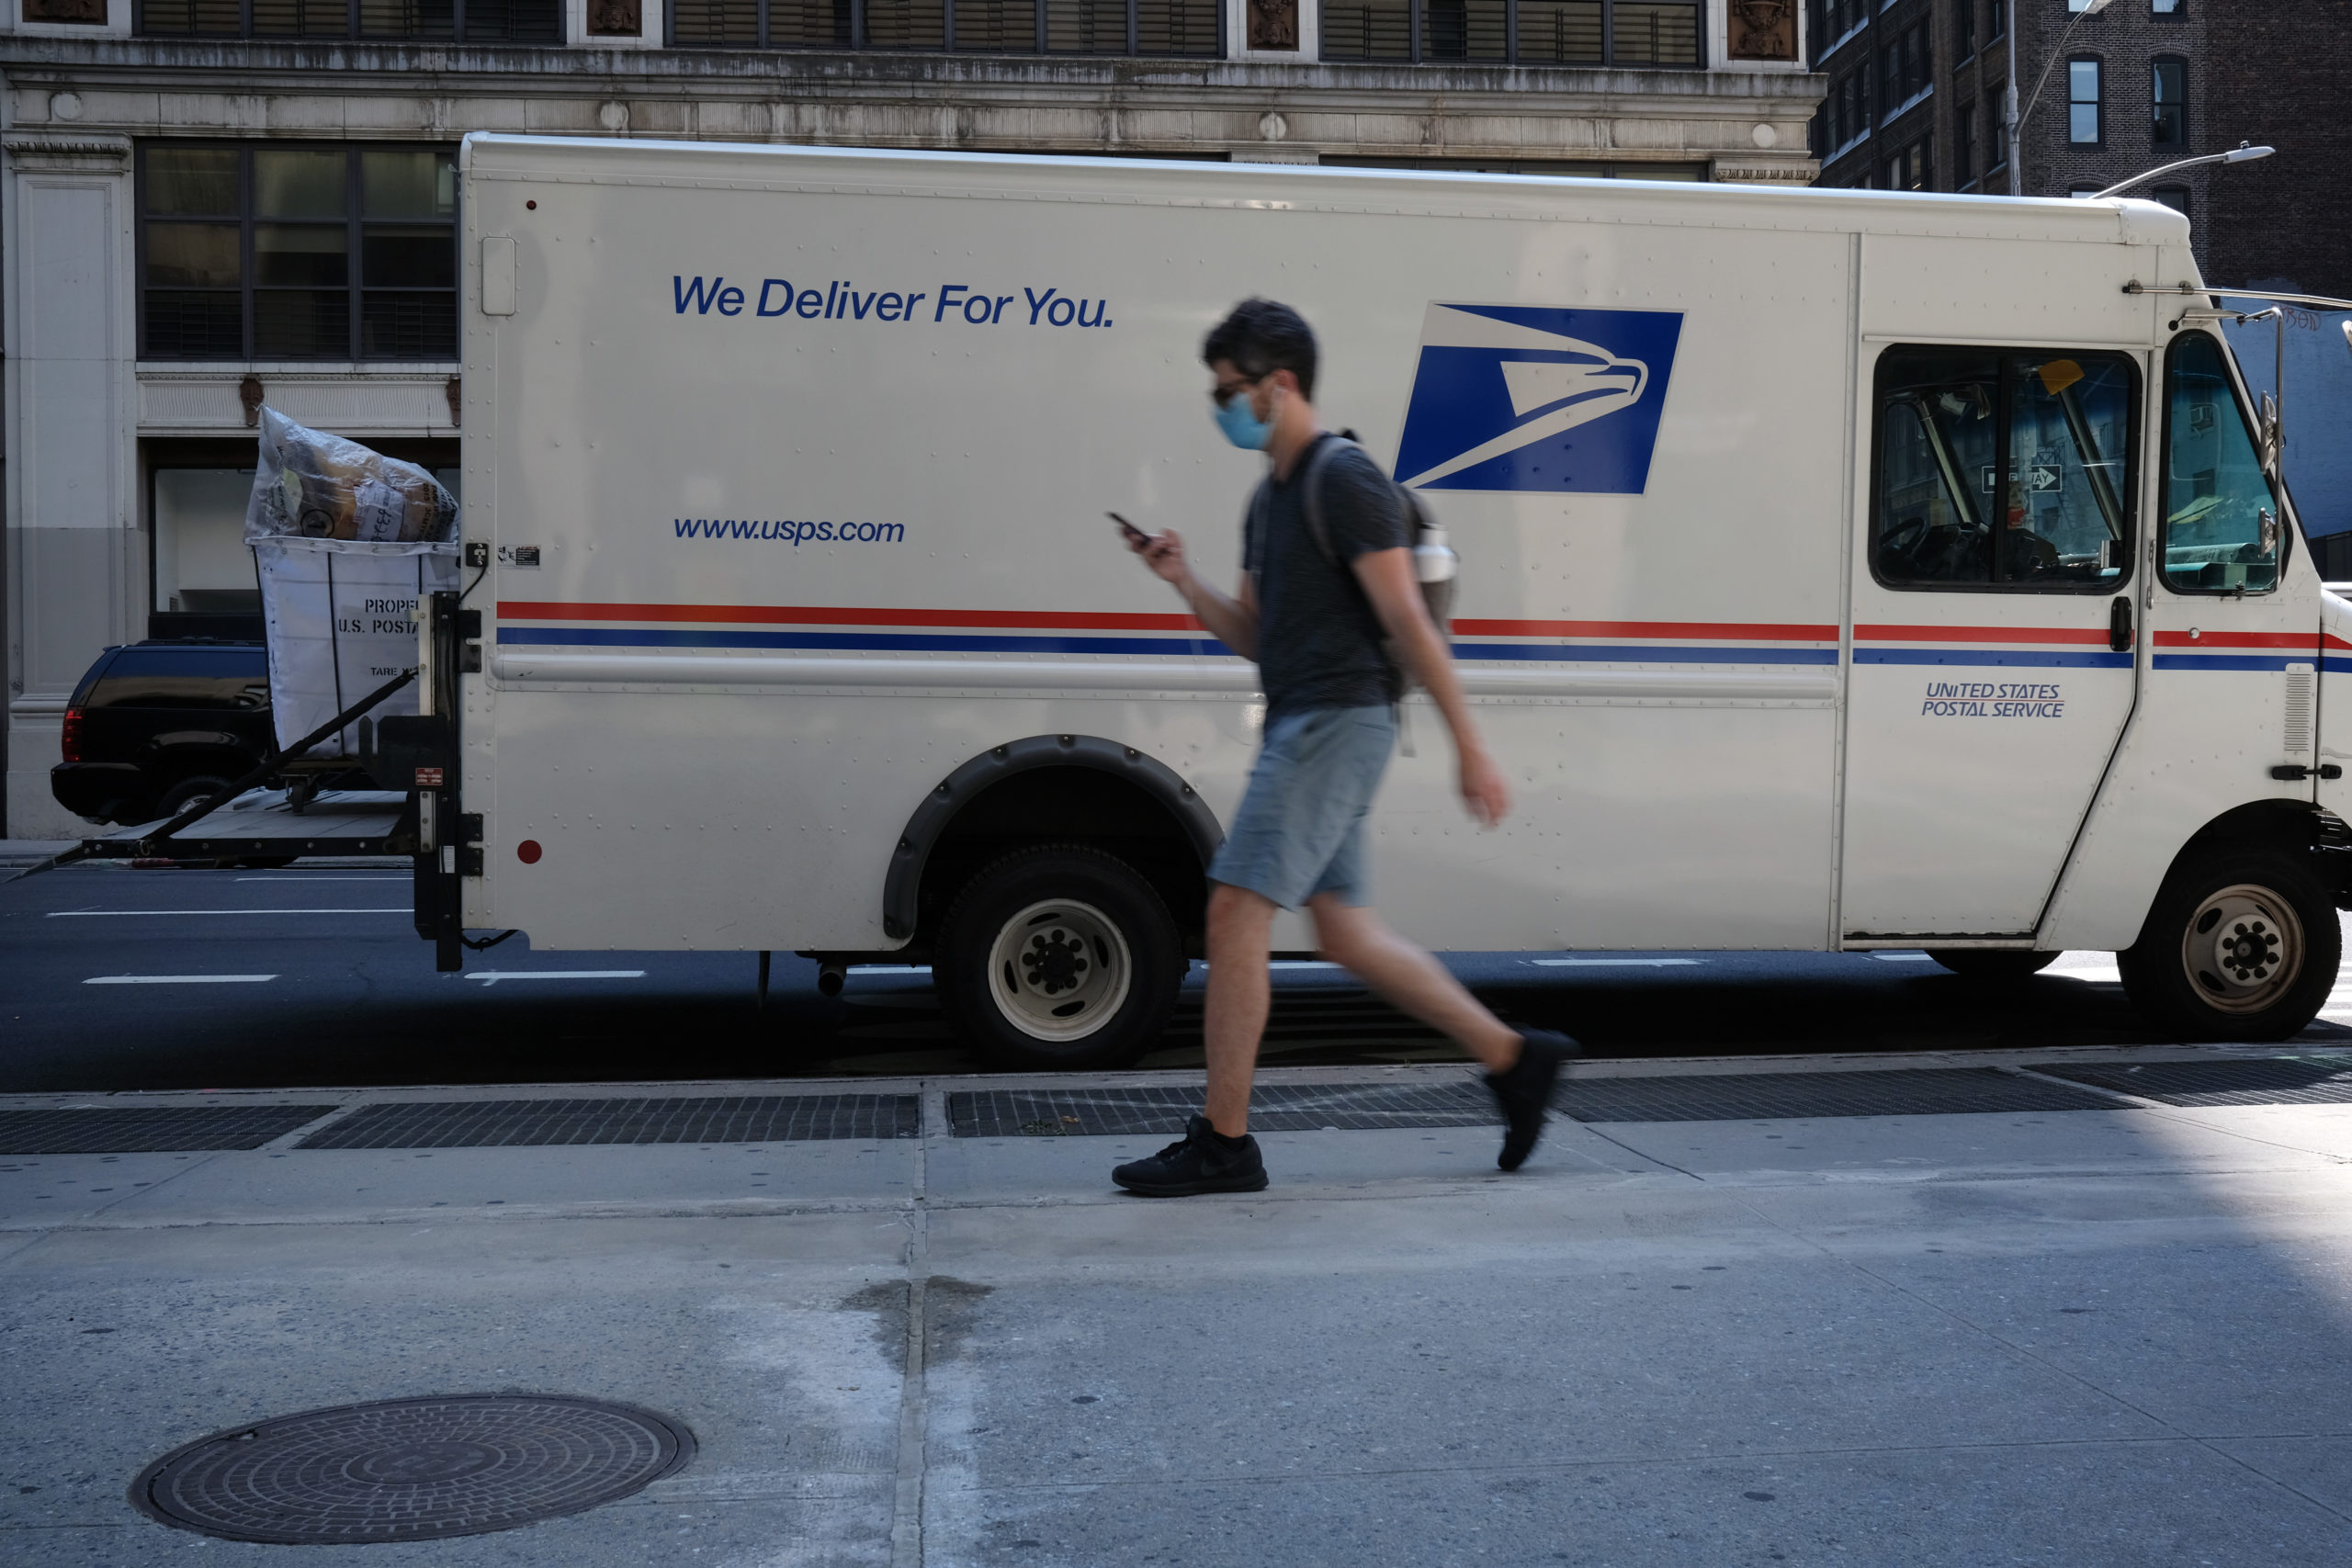 A USPS truck is parked on Aug. 5, 2020 in New York City. (Spencer Platt/Getty Images)